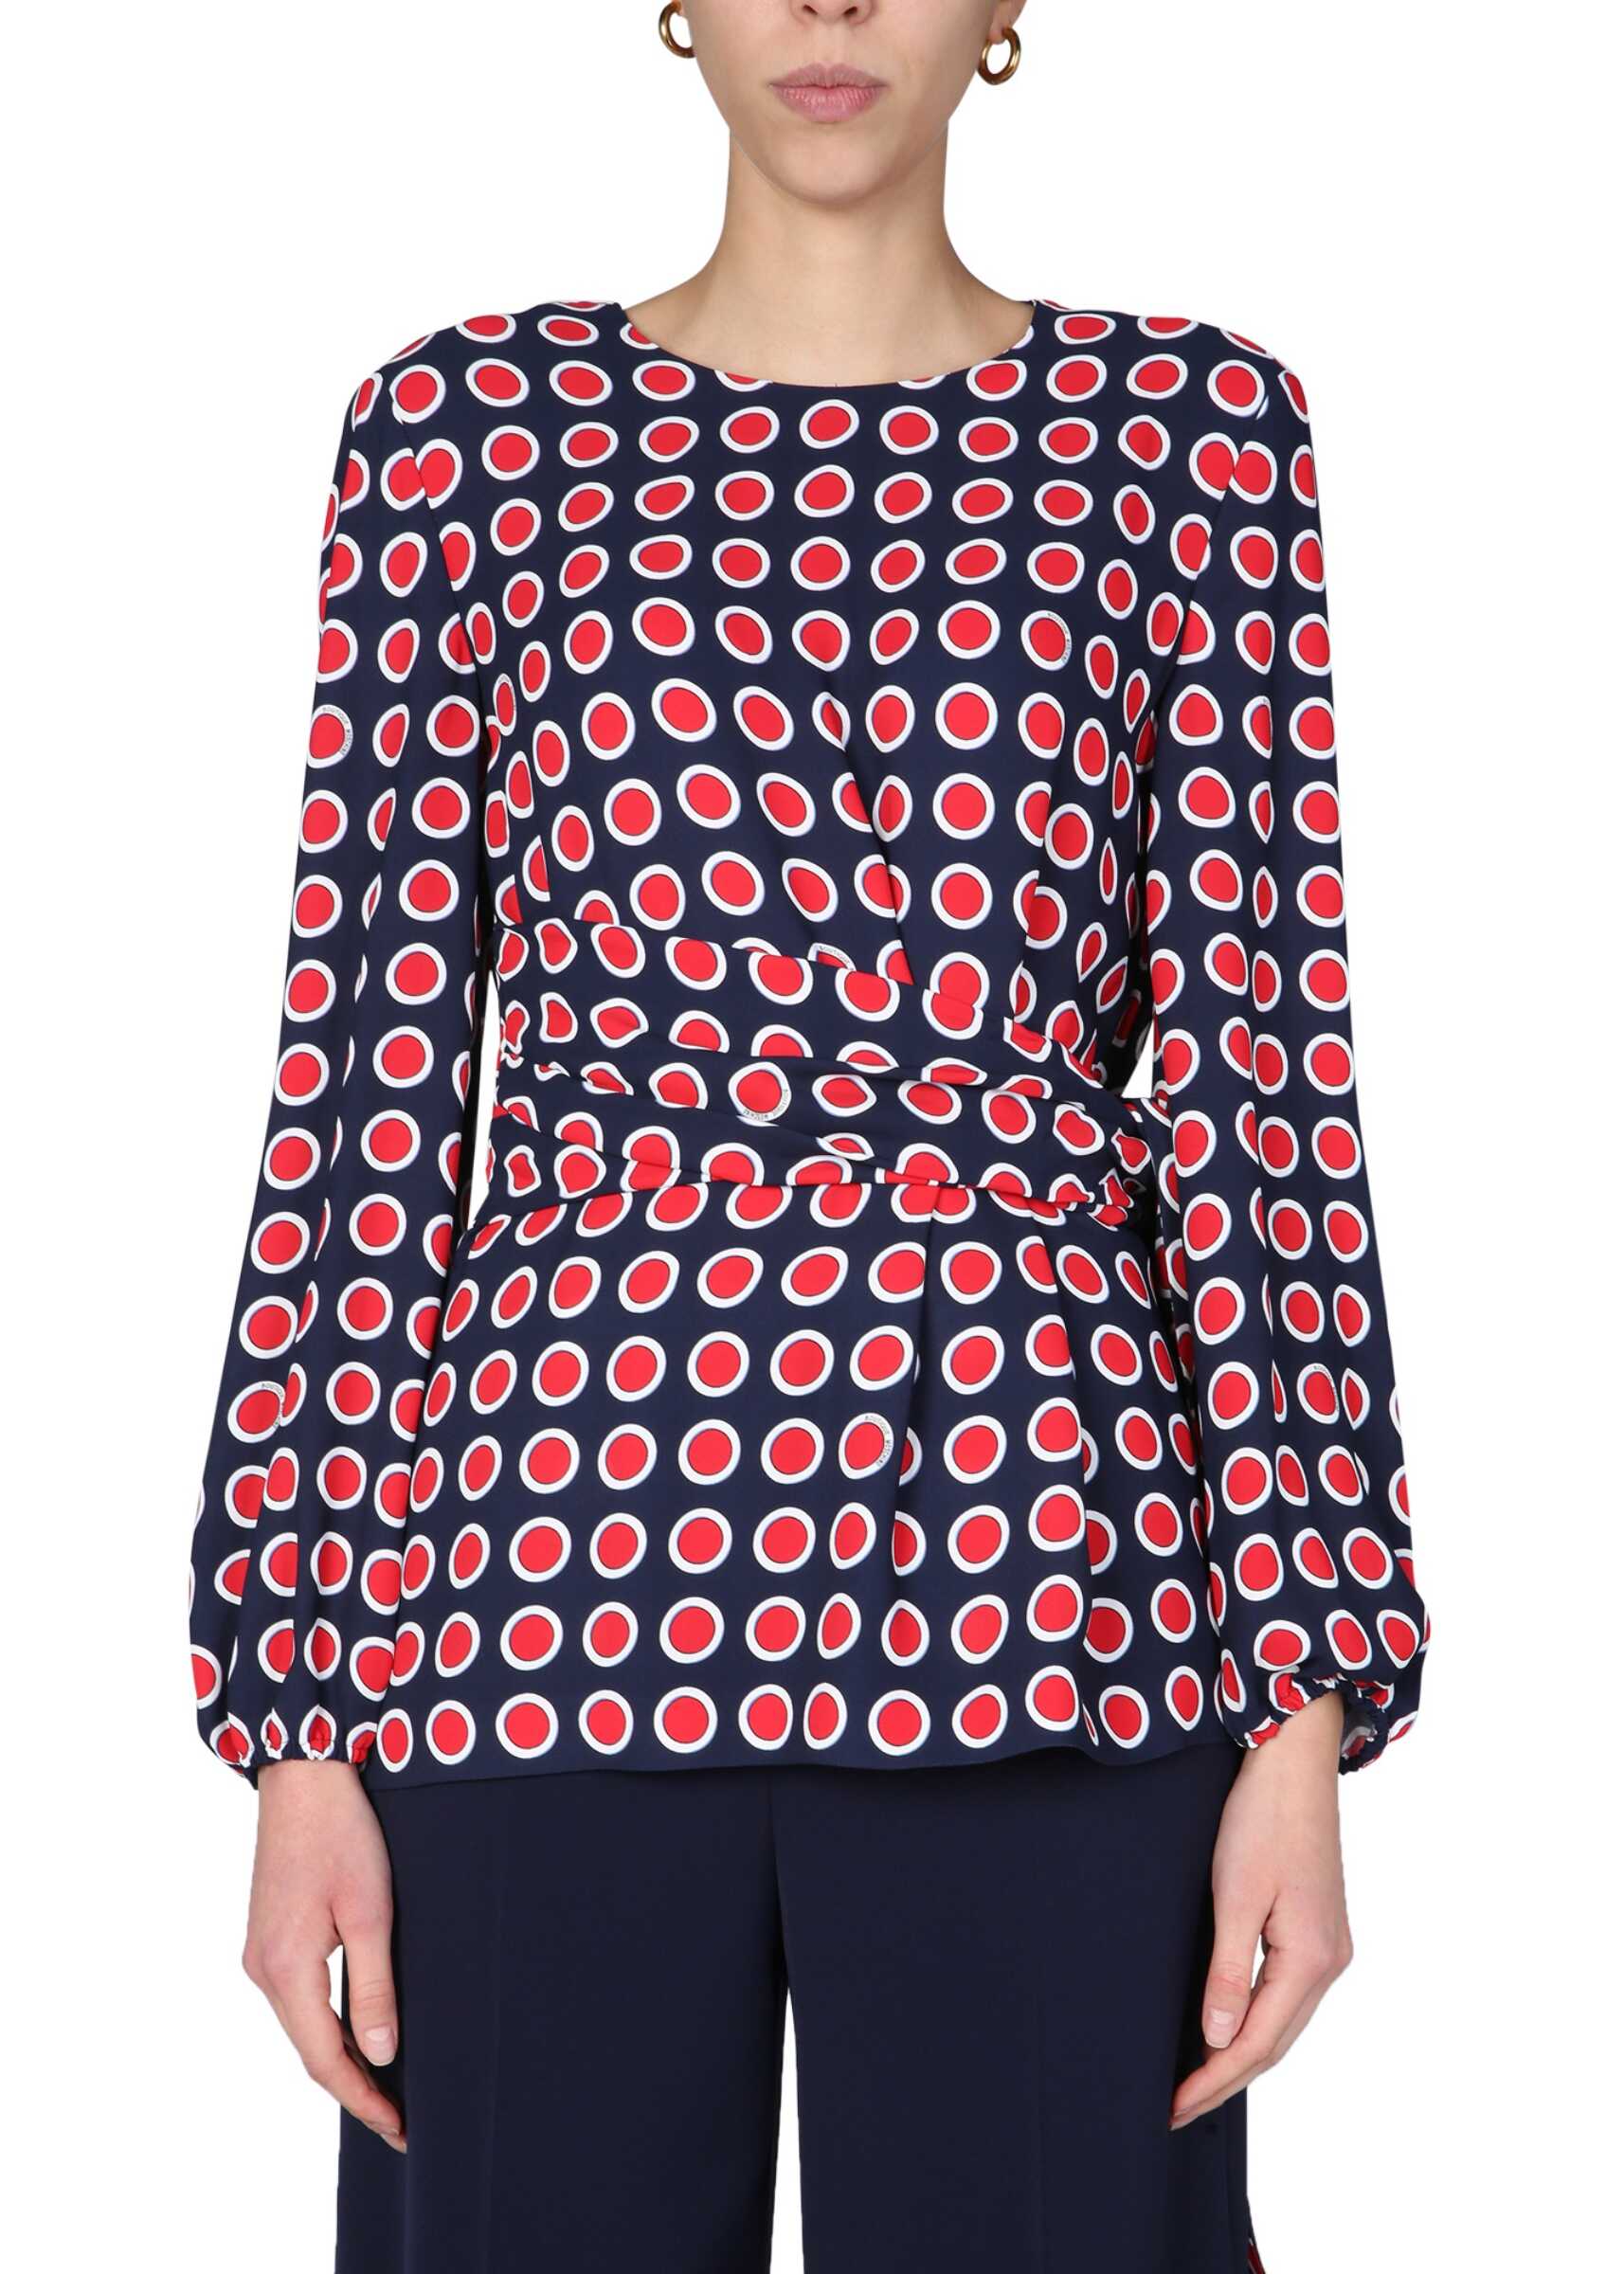 LOVE Moschino "Eyelets" Blouse 02041151_1290 BLUE